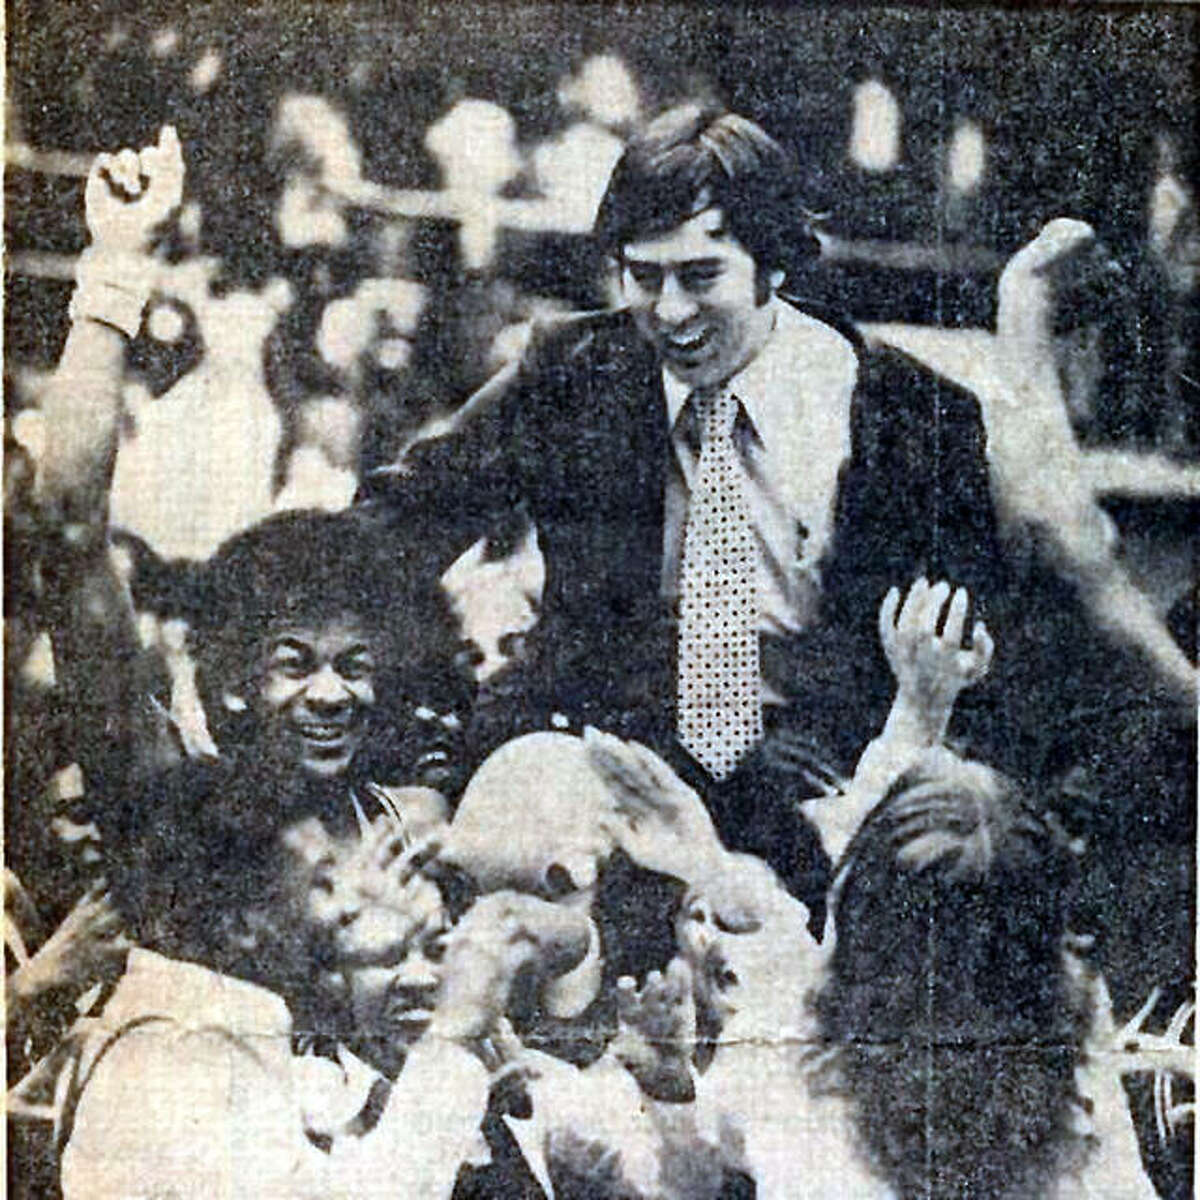 Coach Larry Graham is carried off the court by Madison Trojans team and fans after winning the Vandalia Class A Sectional championship in 1978 on their way to the Class A state championship. Graham, who went on to lead Madison to another state title before moving to SIUE, died a year ago at the age of 77. A Celebration of Life golf outing in his memory is set for Oct. 8 at Arlington Greens Golf Course near Granite City.